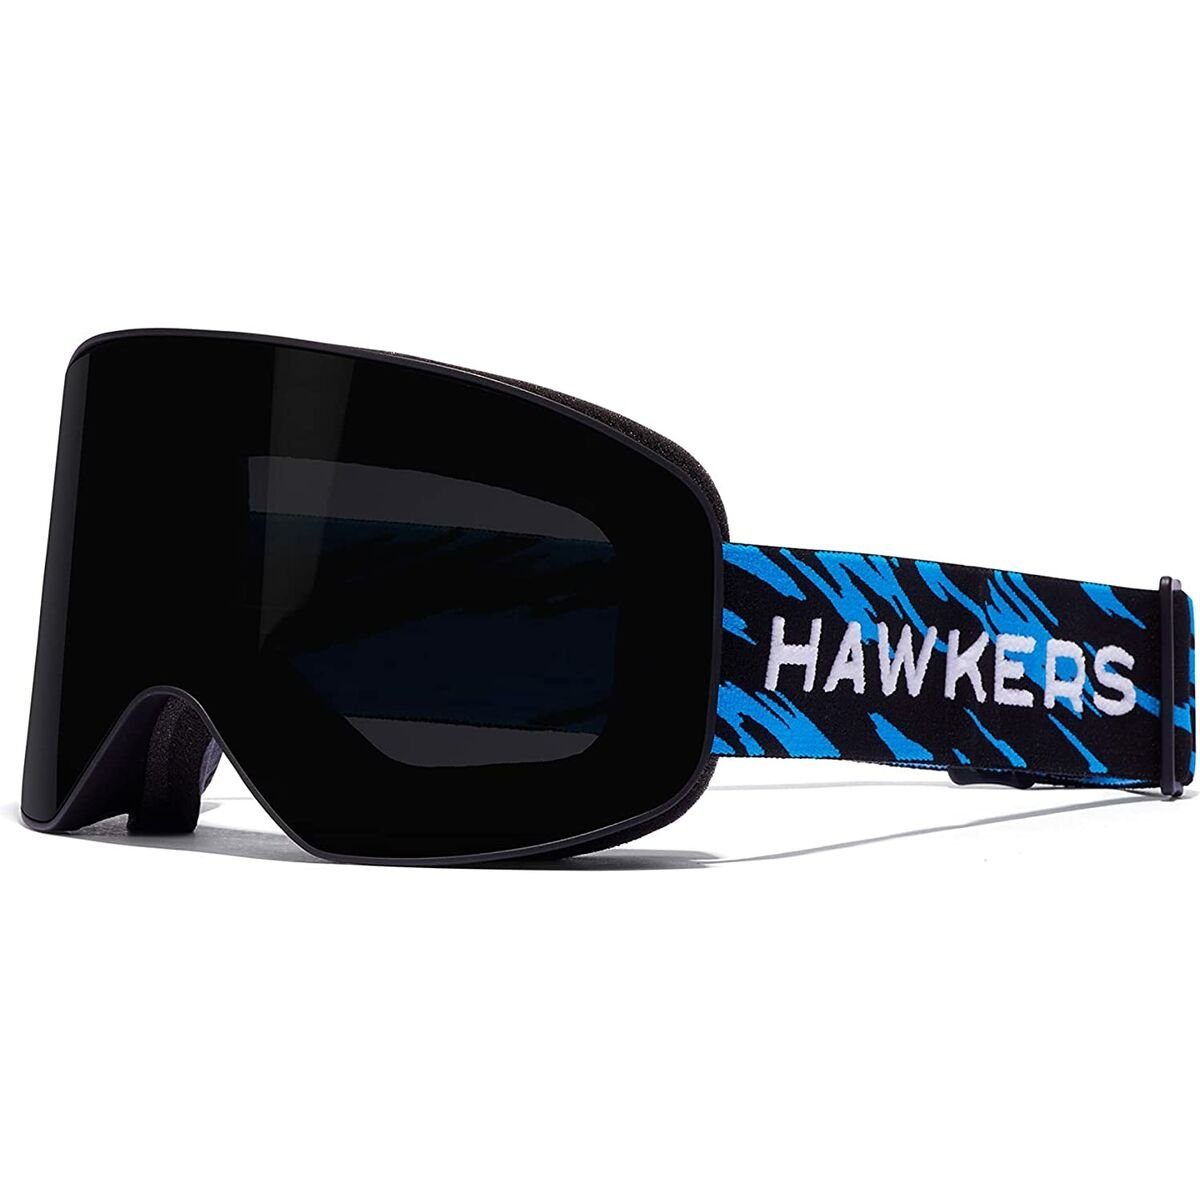 Hawkers Skibrille